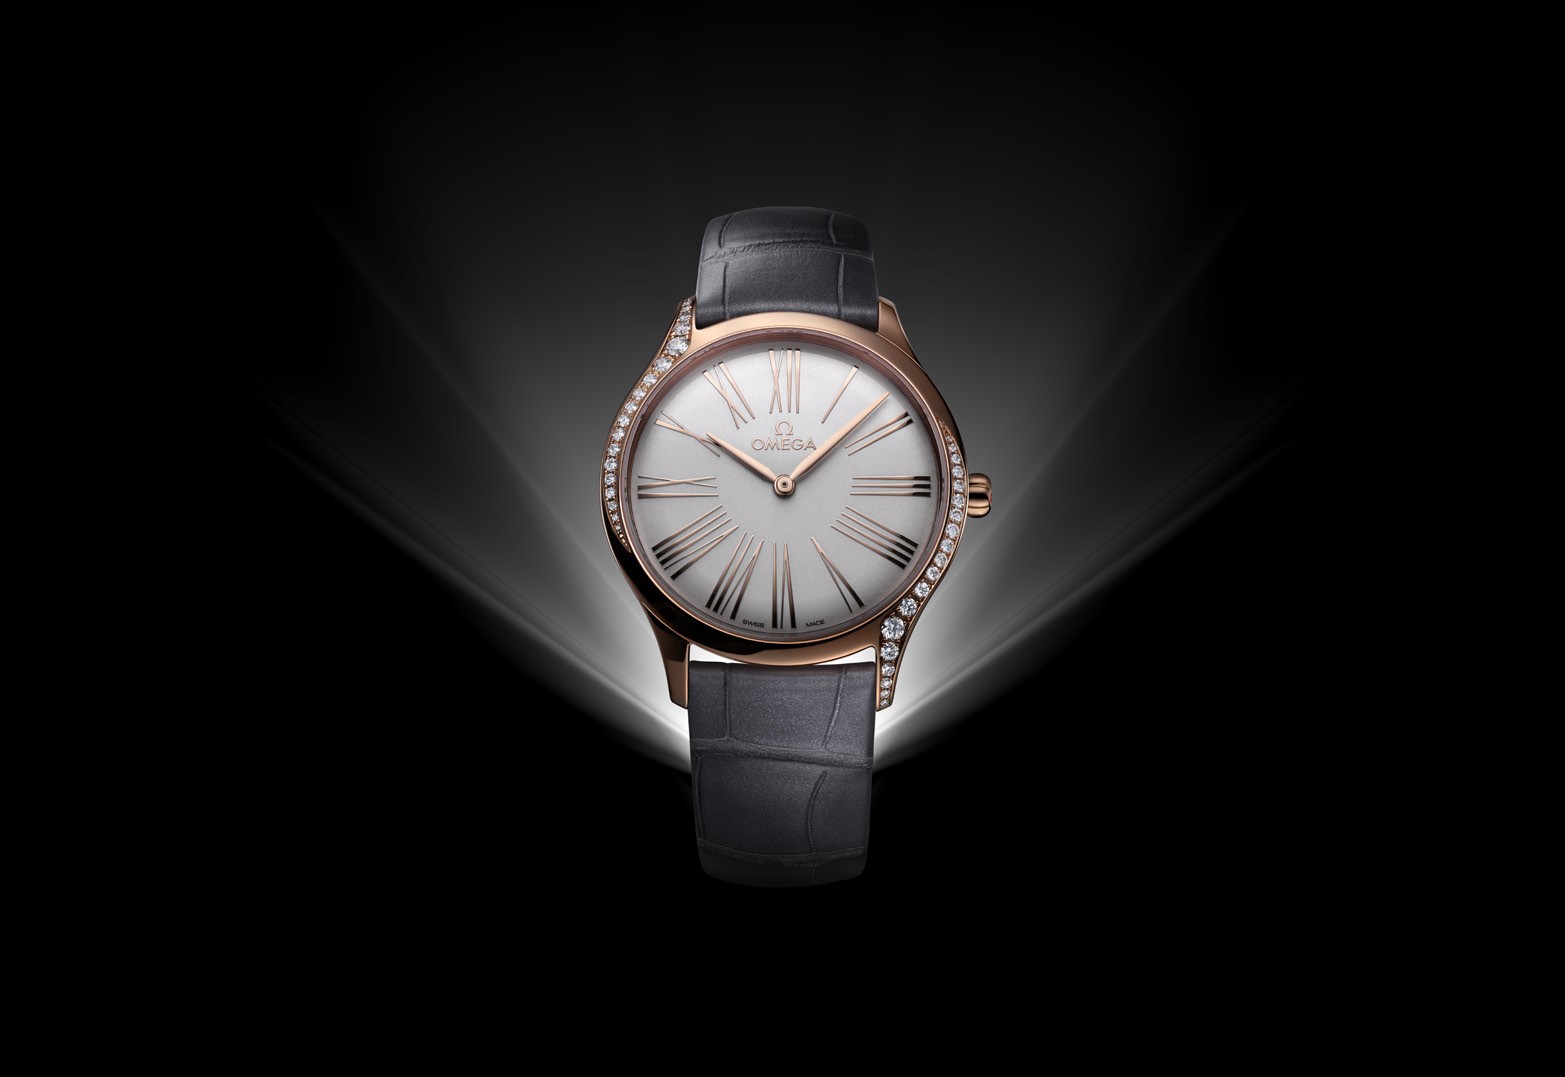 Omega’s De Ville Trésor 36 mm comes in 18ct Sedna gold with a lacquered opaline silver dial and grey leather straps.